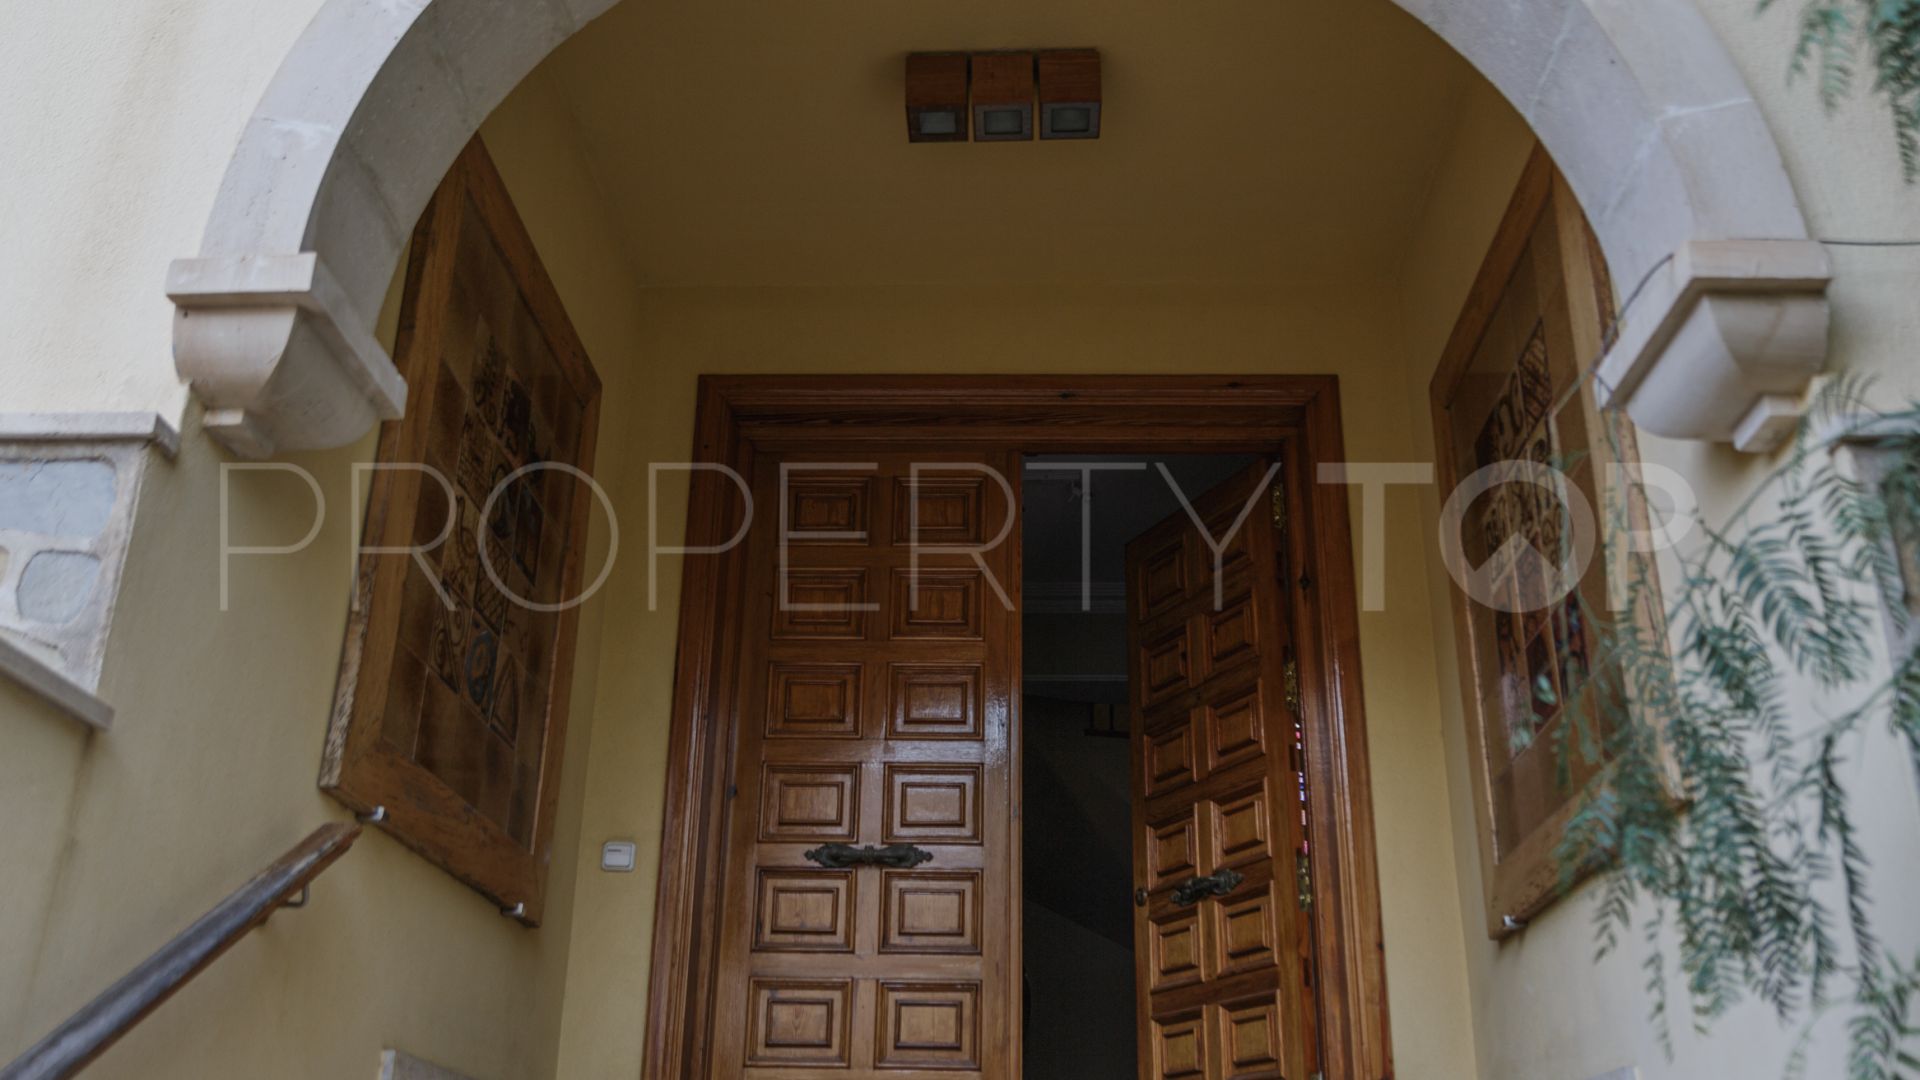 For sale villa in Son Espanyolet with 4 bedrooms